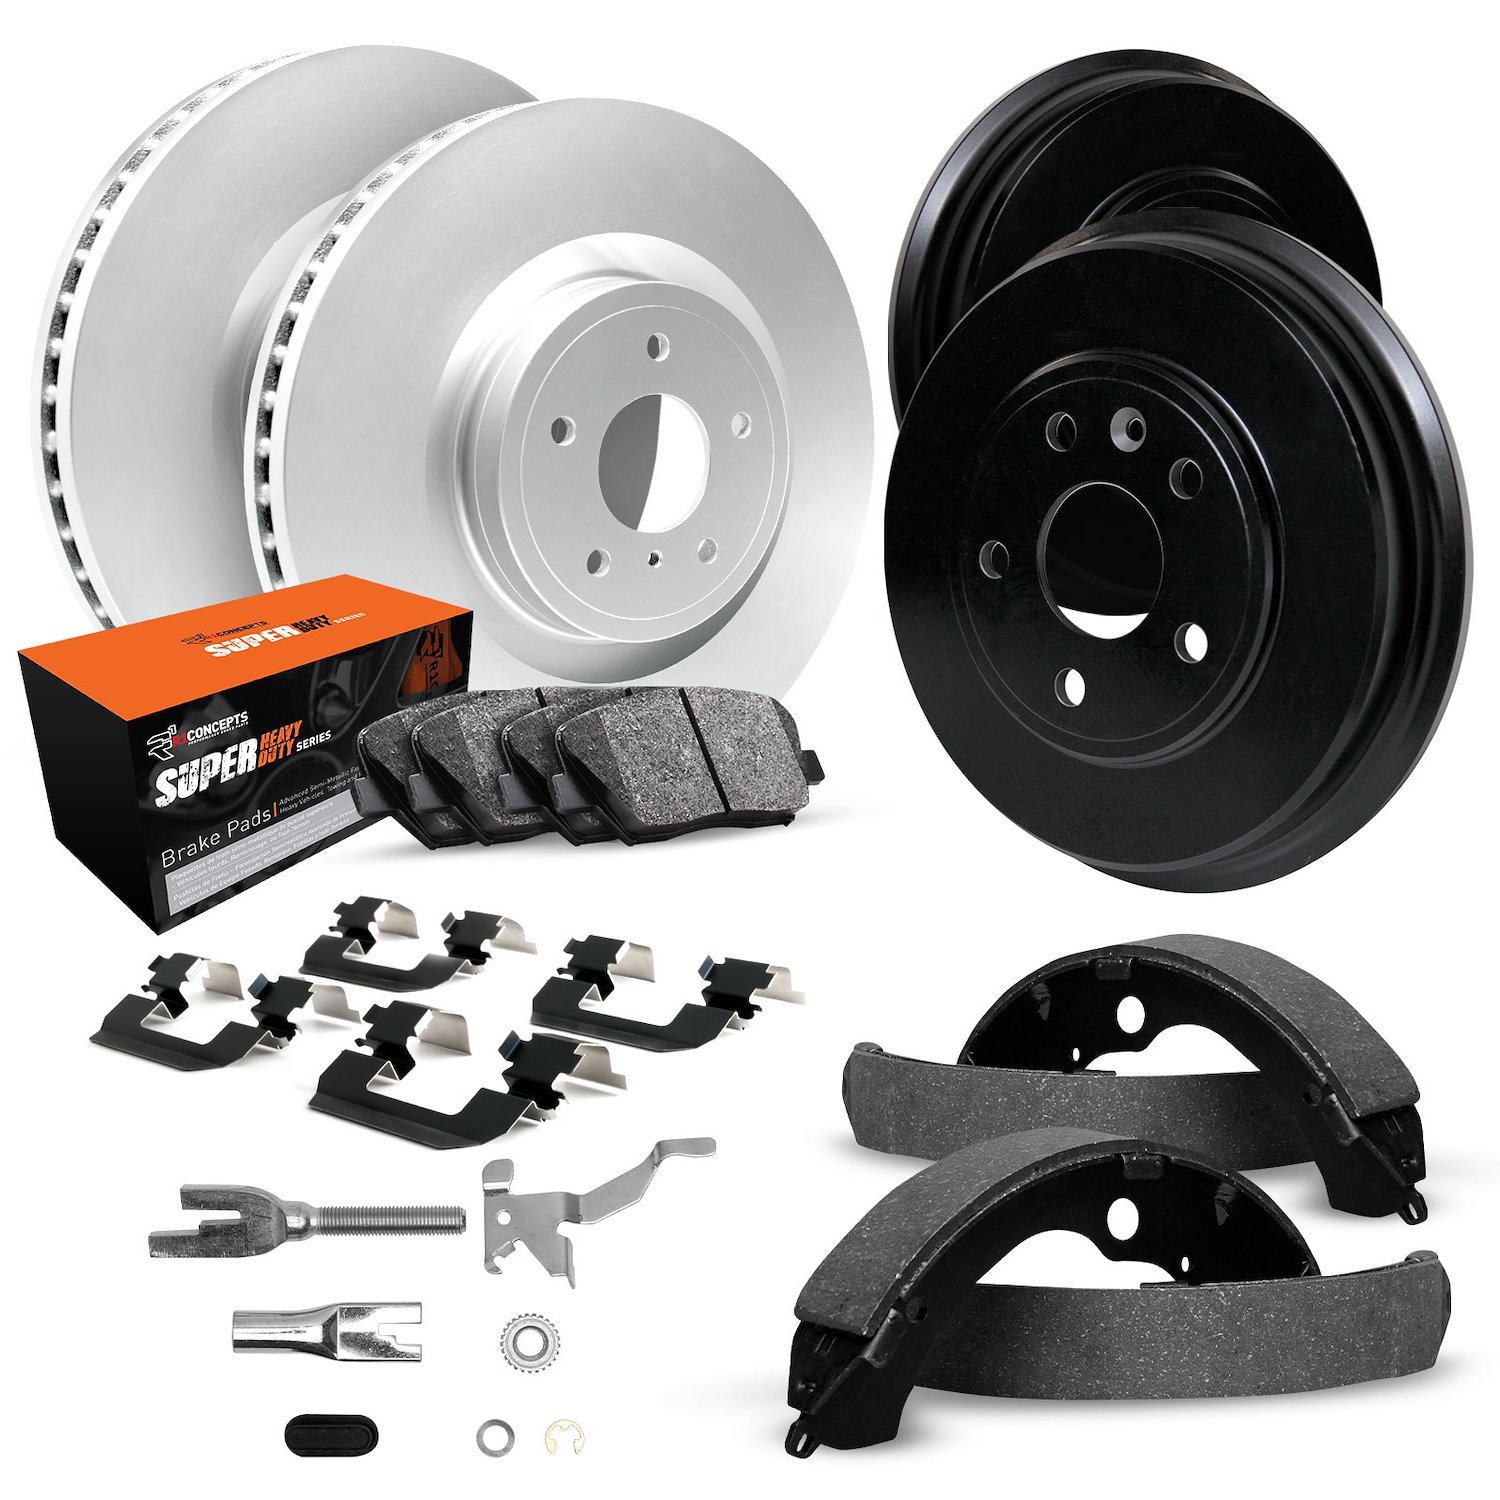 GEO-Carbon Brake Rotor & Drum Set w/Super-Duty Pads, Shoes, Hardware/Adjusters, 1991-1996 GM, Position: Front & Rear